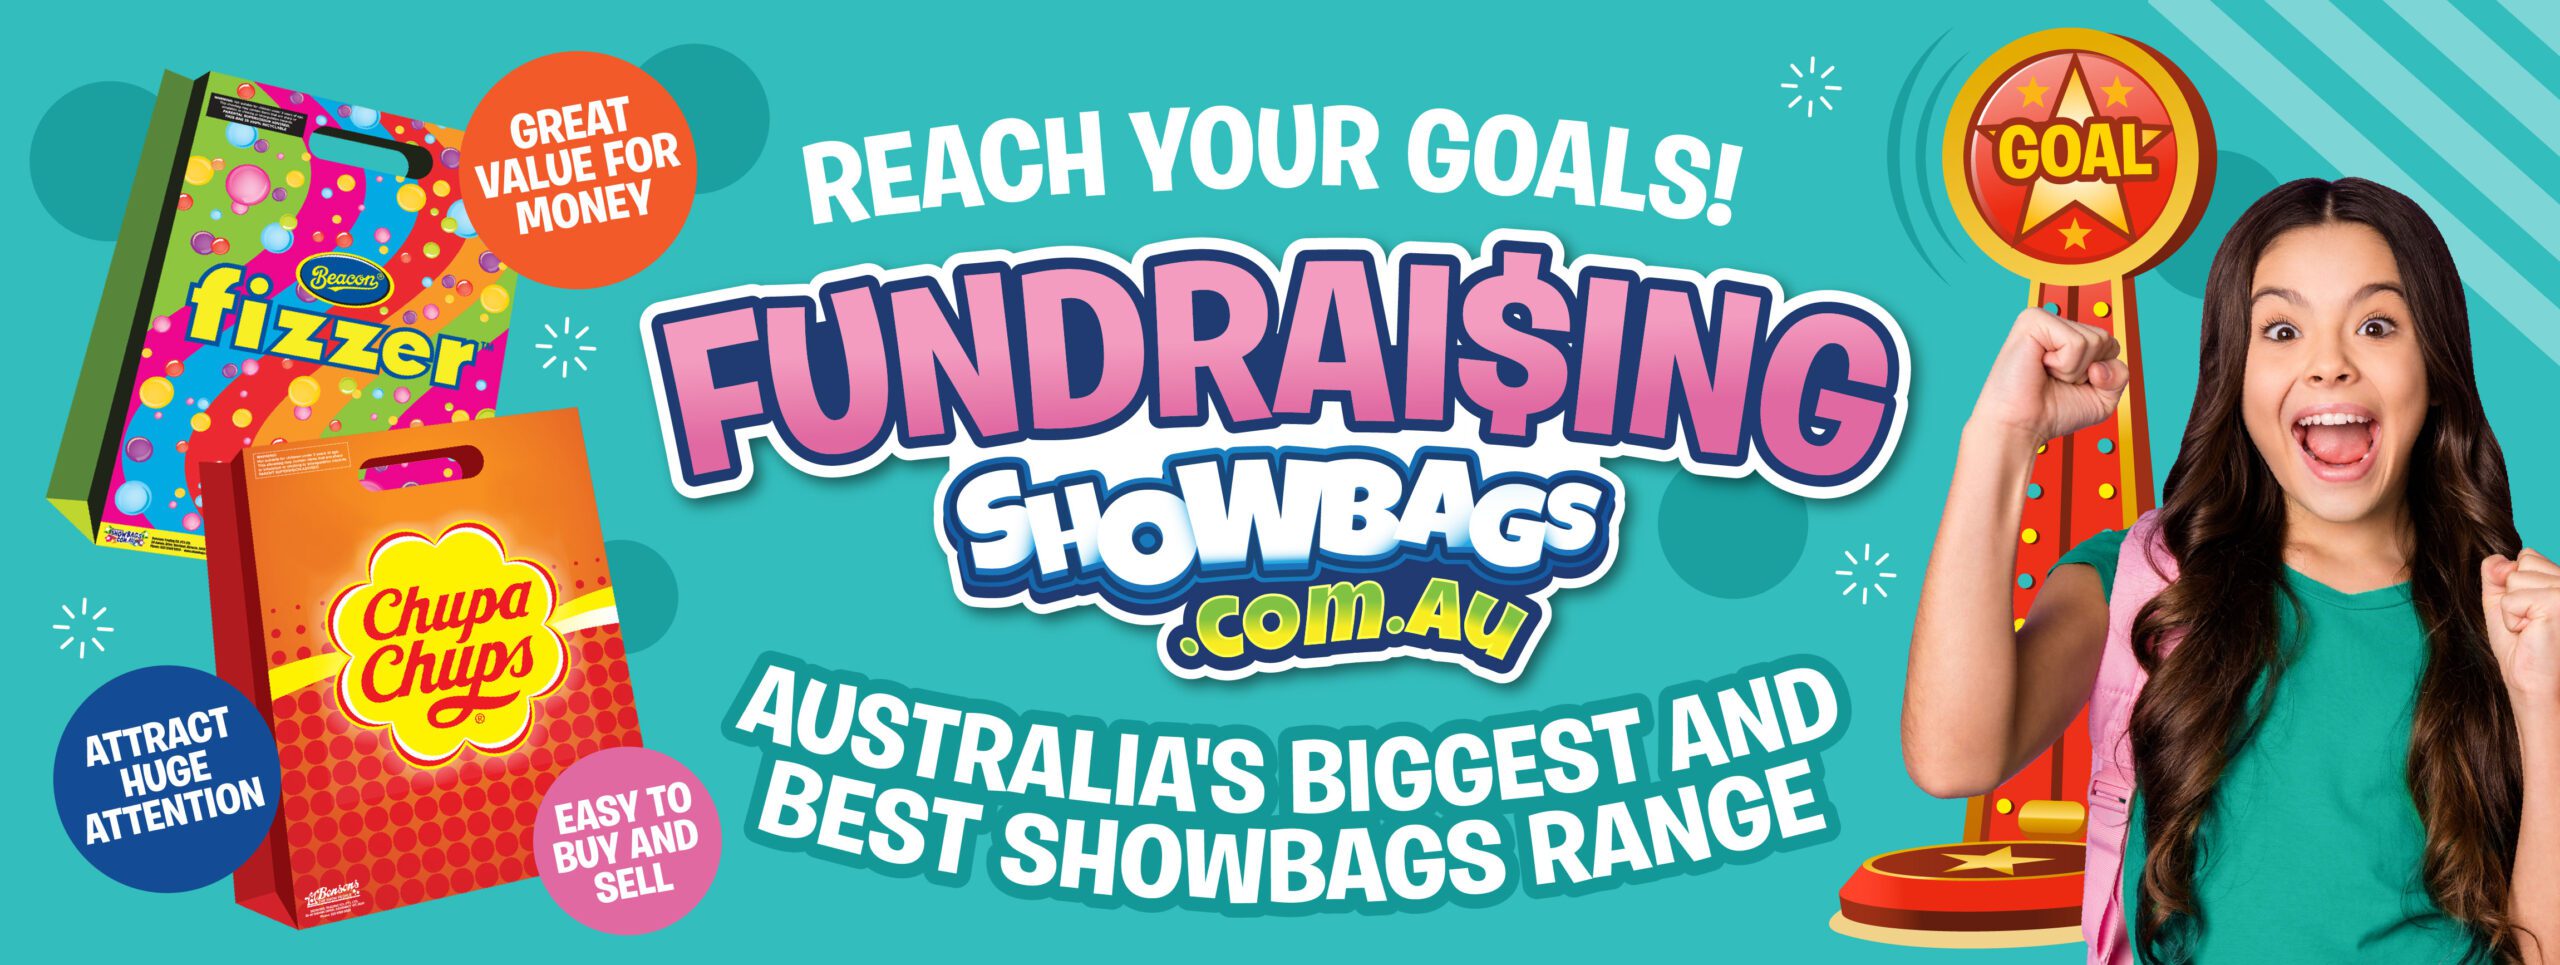 Fundraising Showbags Banner